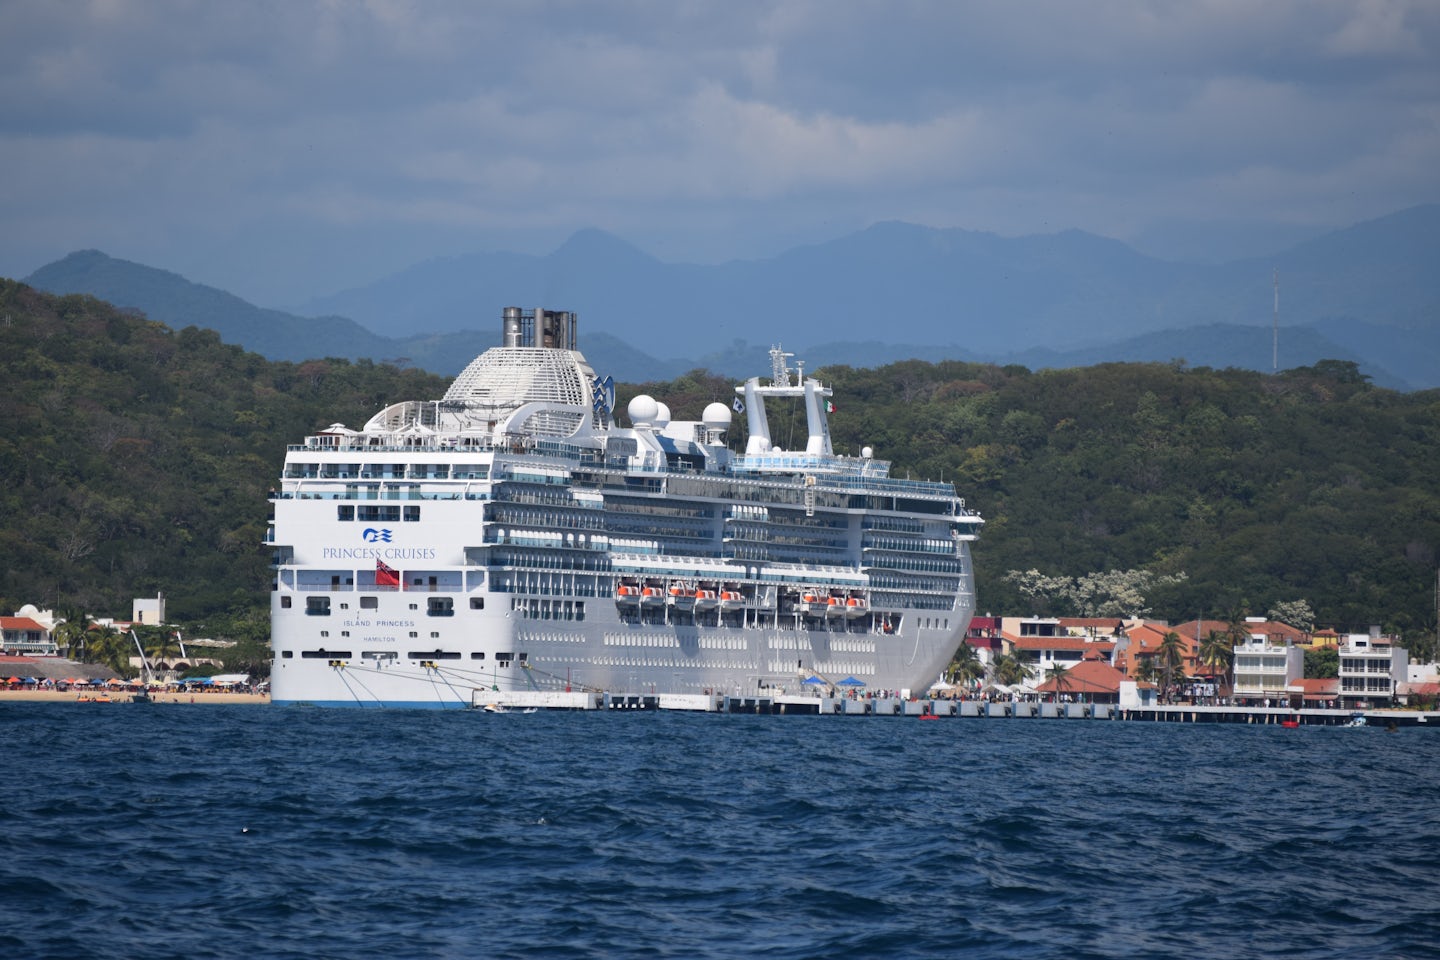 Great view of the Island Princess docked in Huatulco, Mexico as we enjoyed a catamaran boat ride.